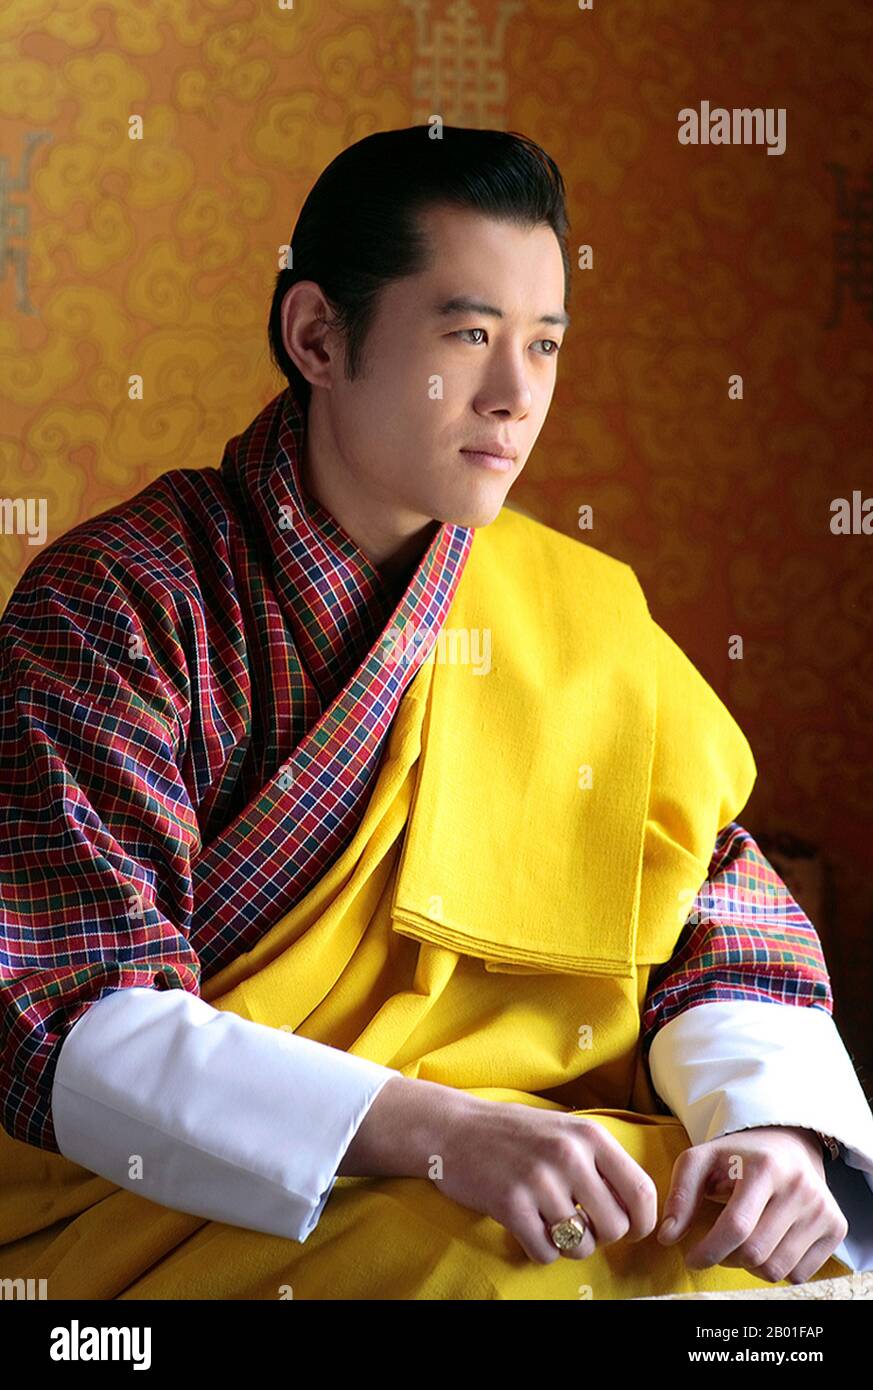 King Khesar (pronounced Gesar) is the eldest son of the fourth and previous Dragon King of Bhutan, Jigme Singye Wangchuck, and his father's third wife, Queen (Ashi) Tshering Yangdon.  After completing his higher secondary studies from Yangchenphu Higher secondary school, Bhutan, Khesar studied abroad at Phillips Academy (Andover, Massachusetts), Cushing Academy and Wheaton College in Massachusetts, United States, before graduating from Magdalen College, University of Oxford, United Kingdom, where he completed the Foreign Service Programme and International Relations.  In December 2005, King Ji Stock Photo